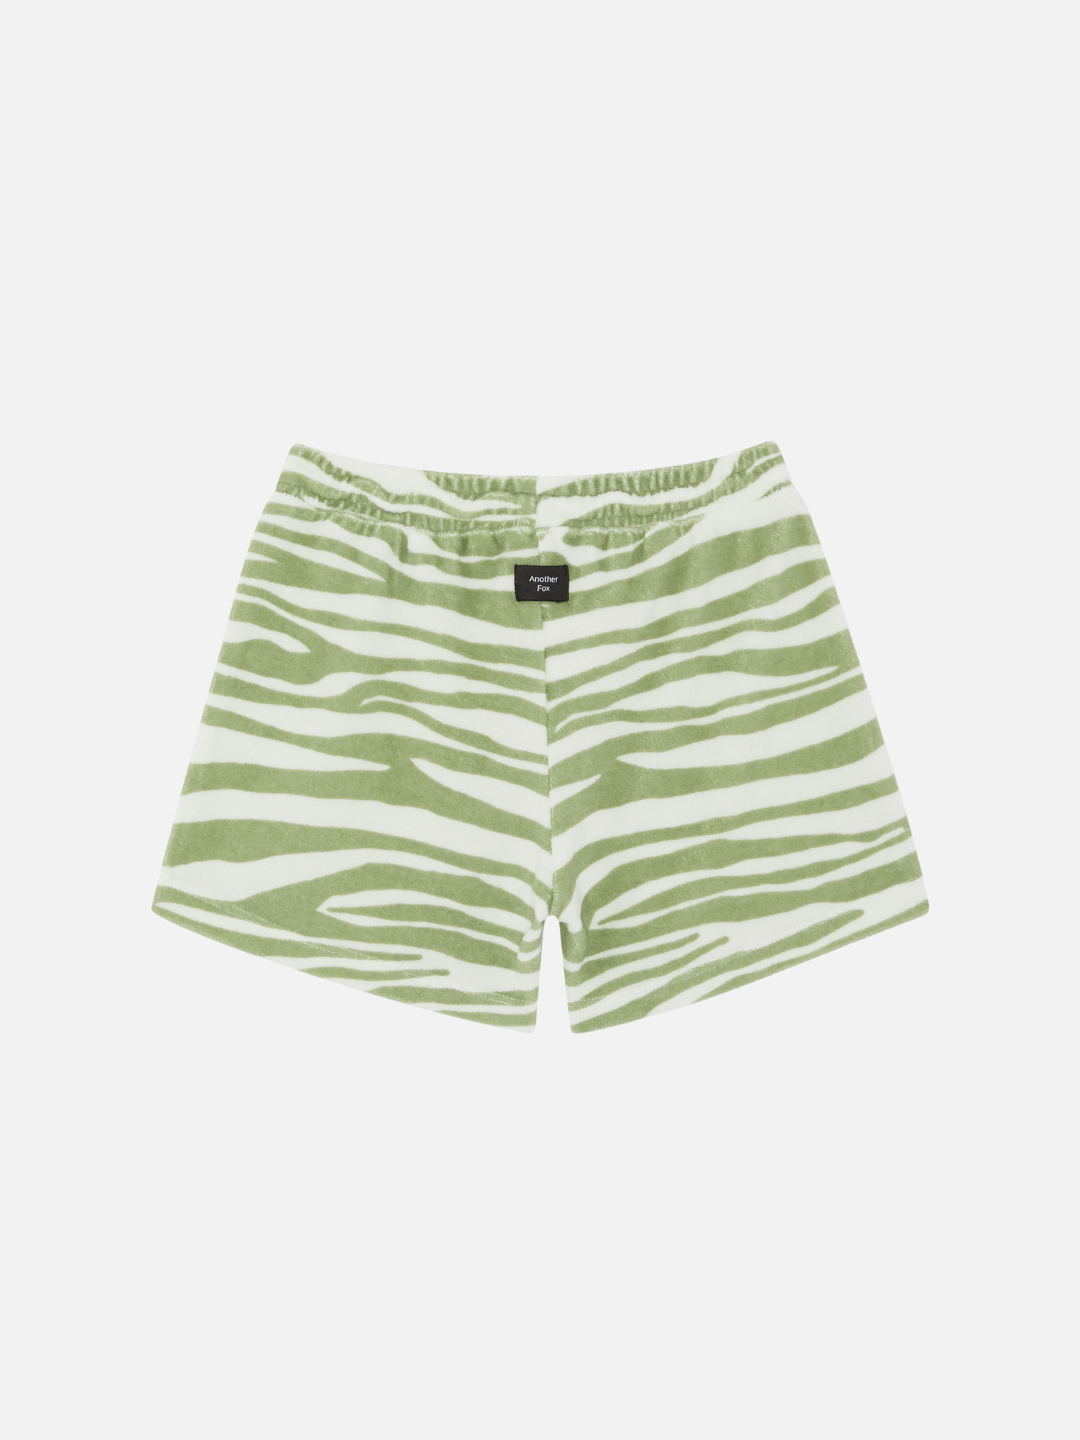 Tiger | A back view of the kid's terry towel shorts in green tiger